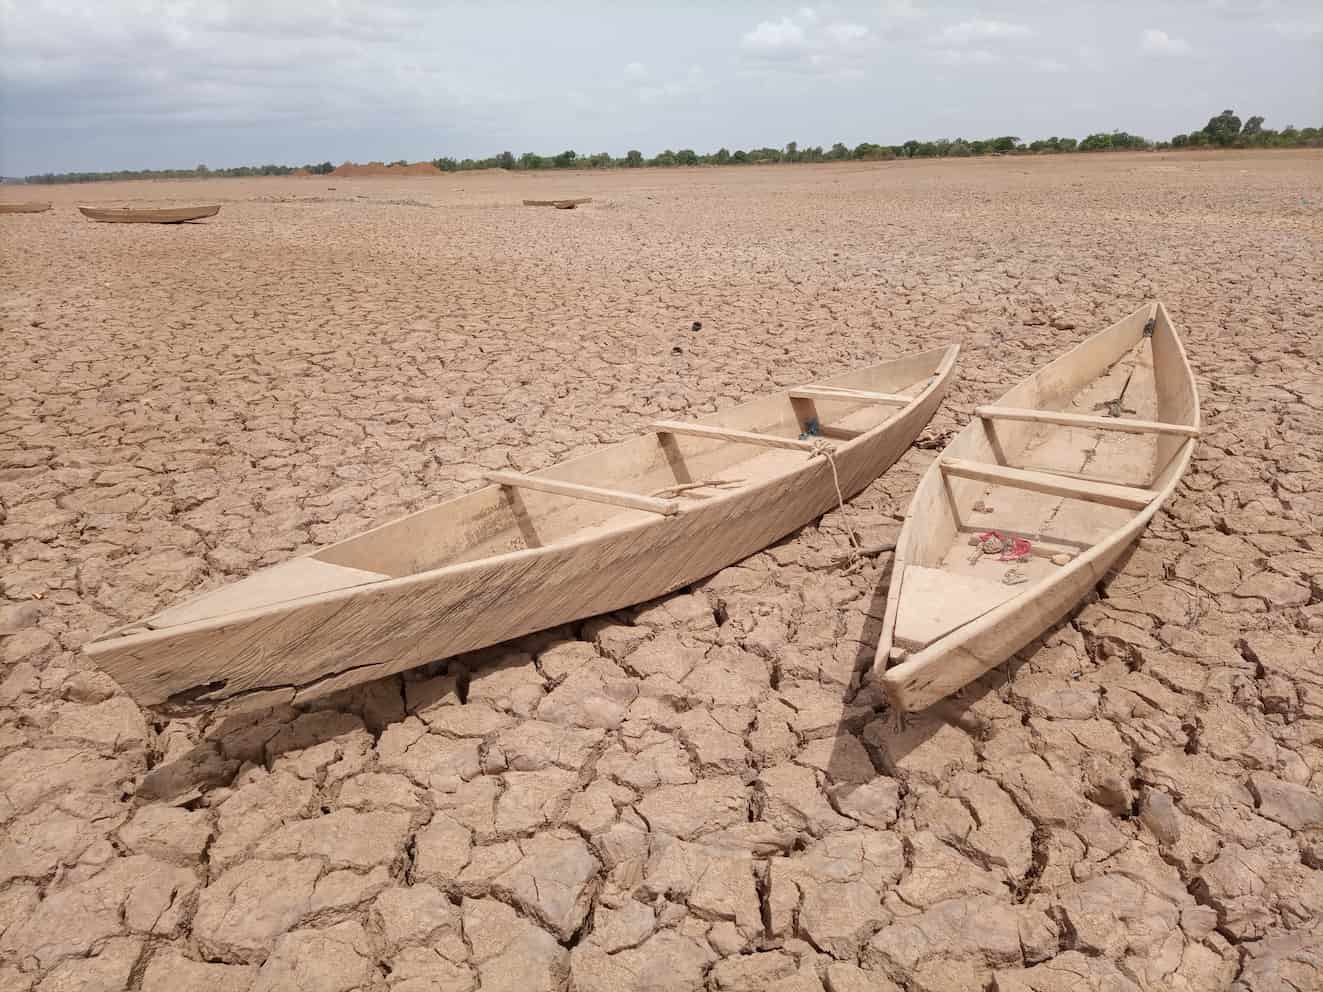 Two boats on an arid dried up lake